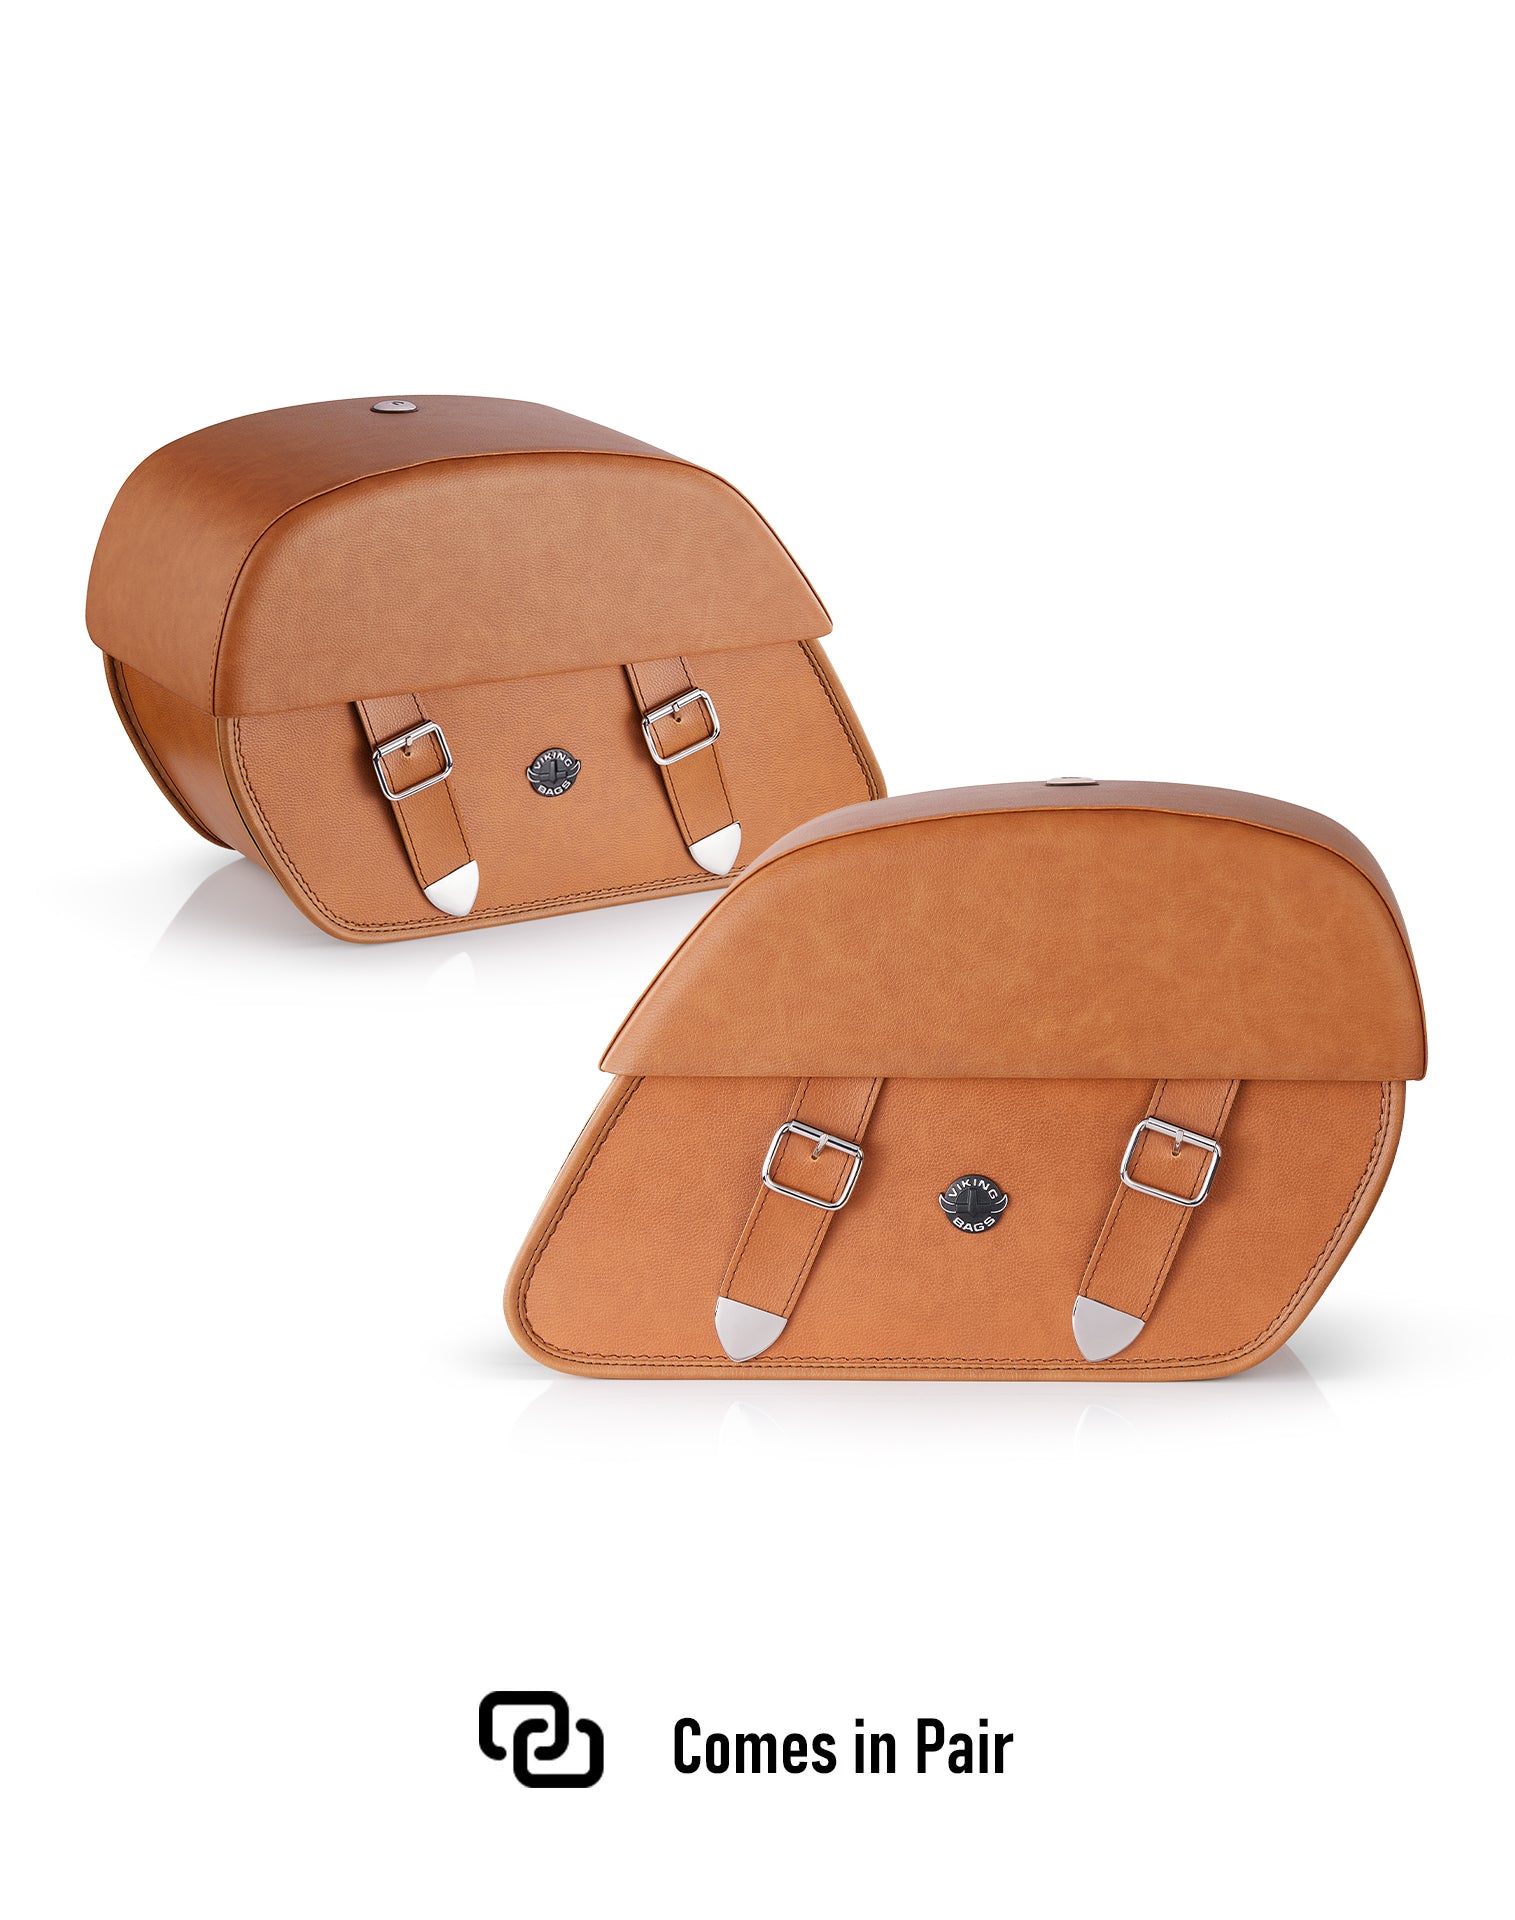 33L - Baelor Brown Large Leather Saddlebags For Harley Softail Standard FXST Pair